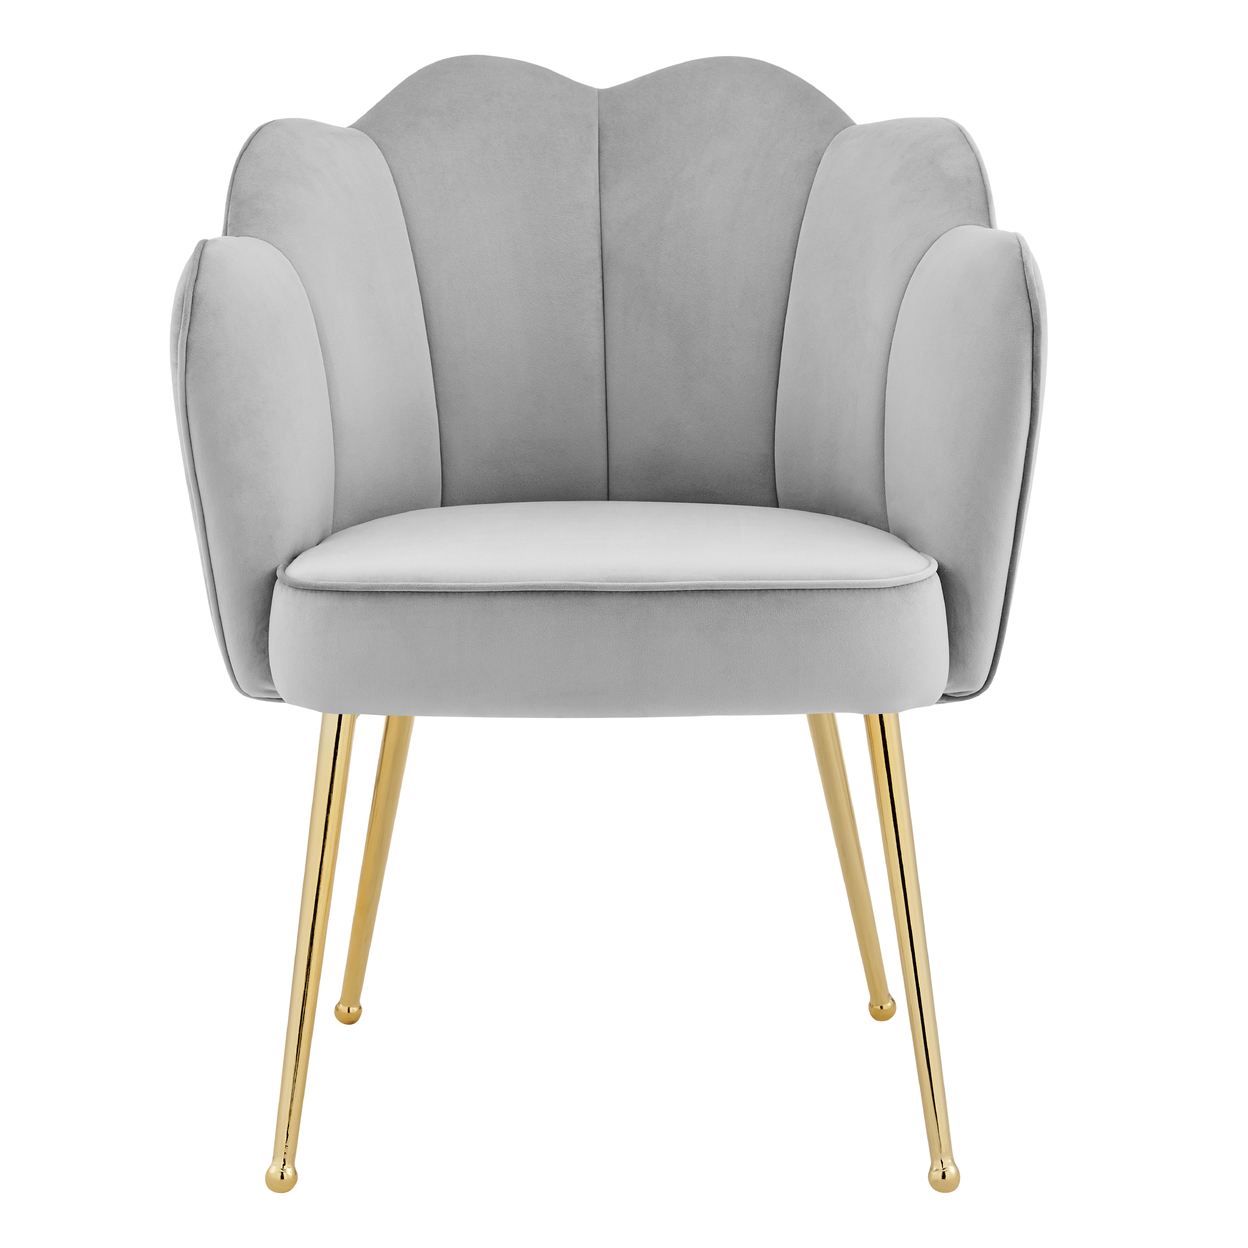 Iconic Home Mia Belle Dining Side Chair Velvet Upholstery Scalloped Clamshell Back Gold Plated Solid Metal Legs (1 Piece) - Navy